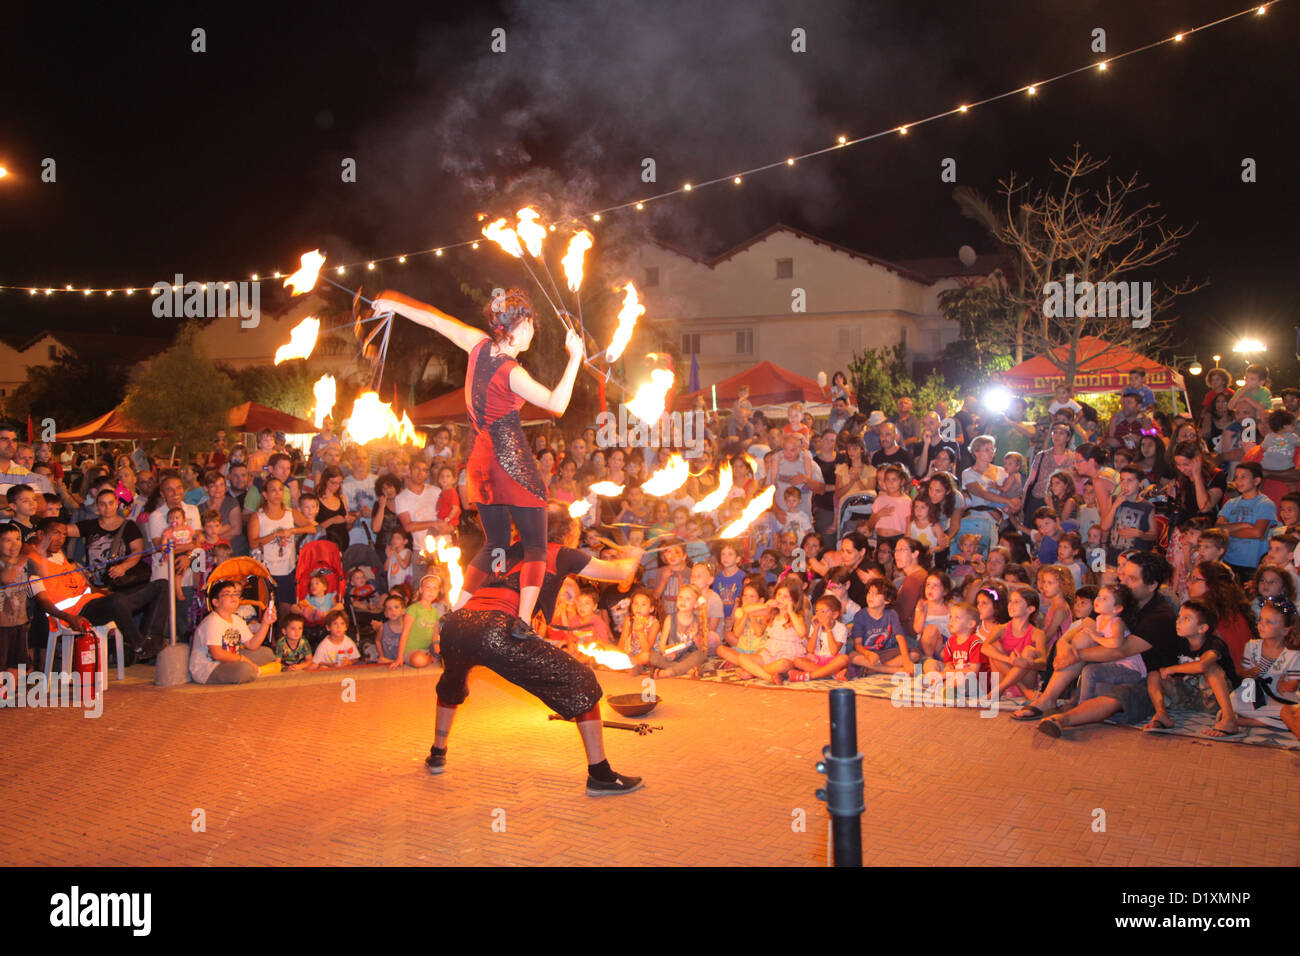 A fire preformance at a festival. Photographed in Israel, Kfar Yona Stock Photo